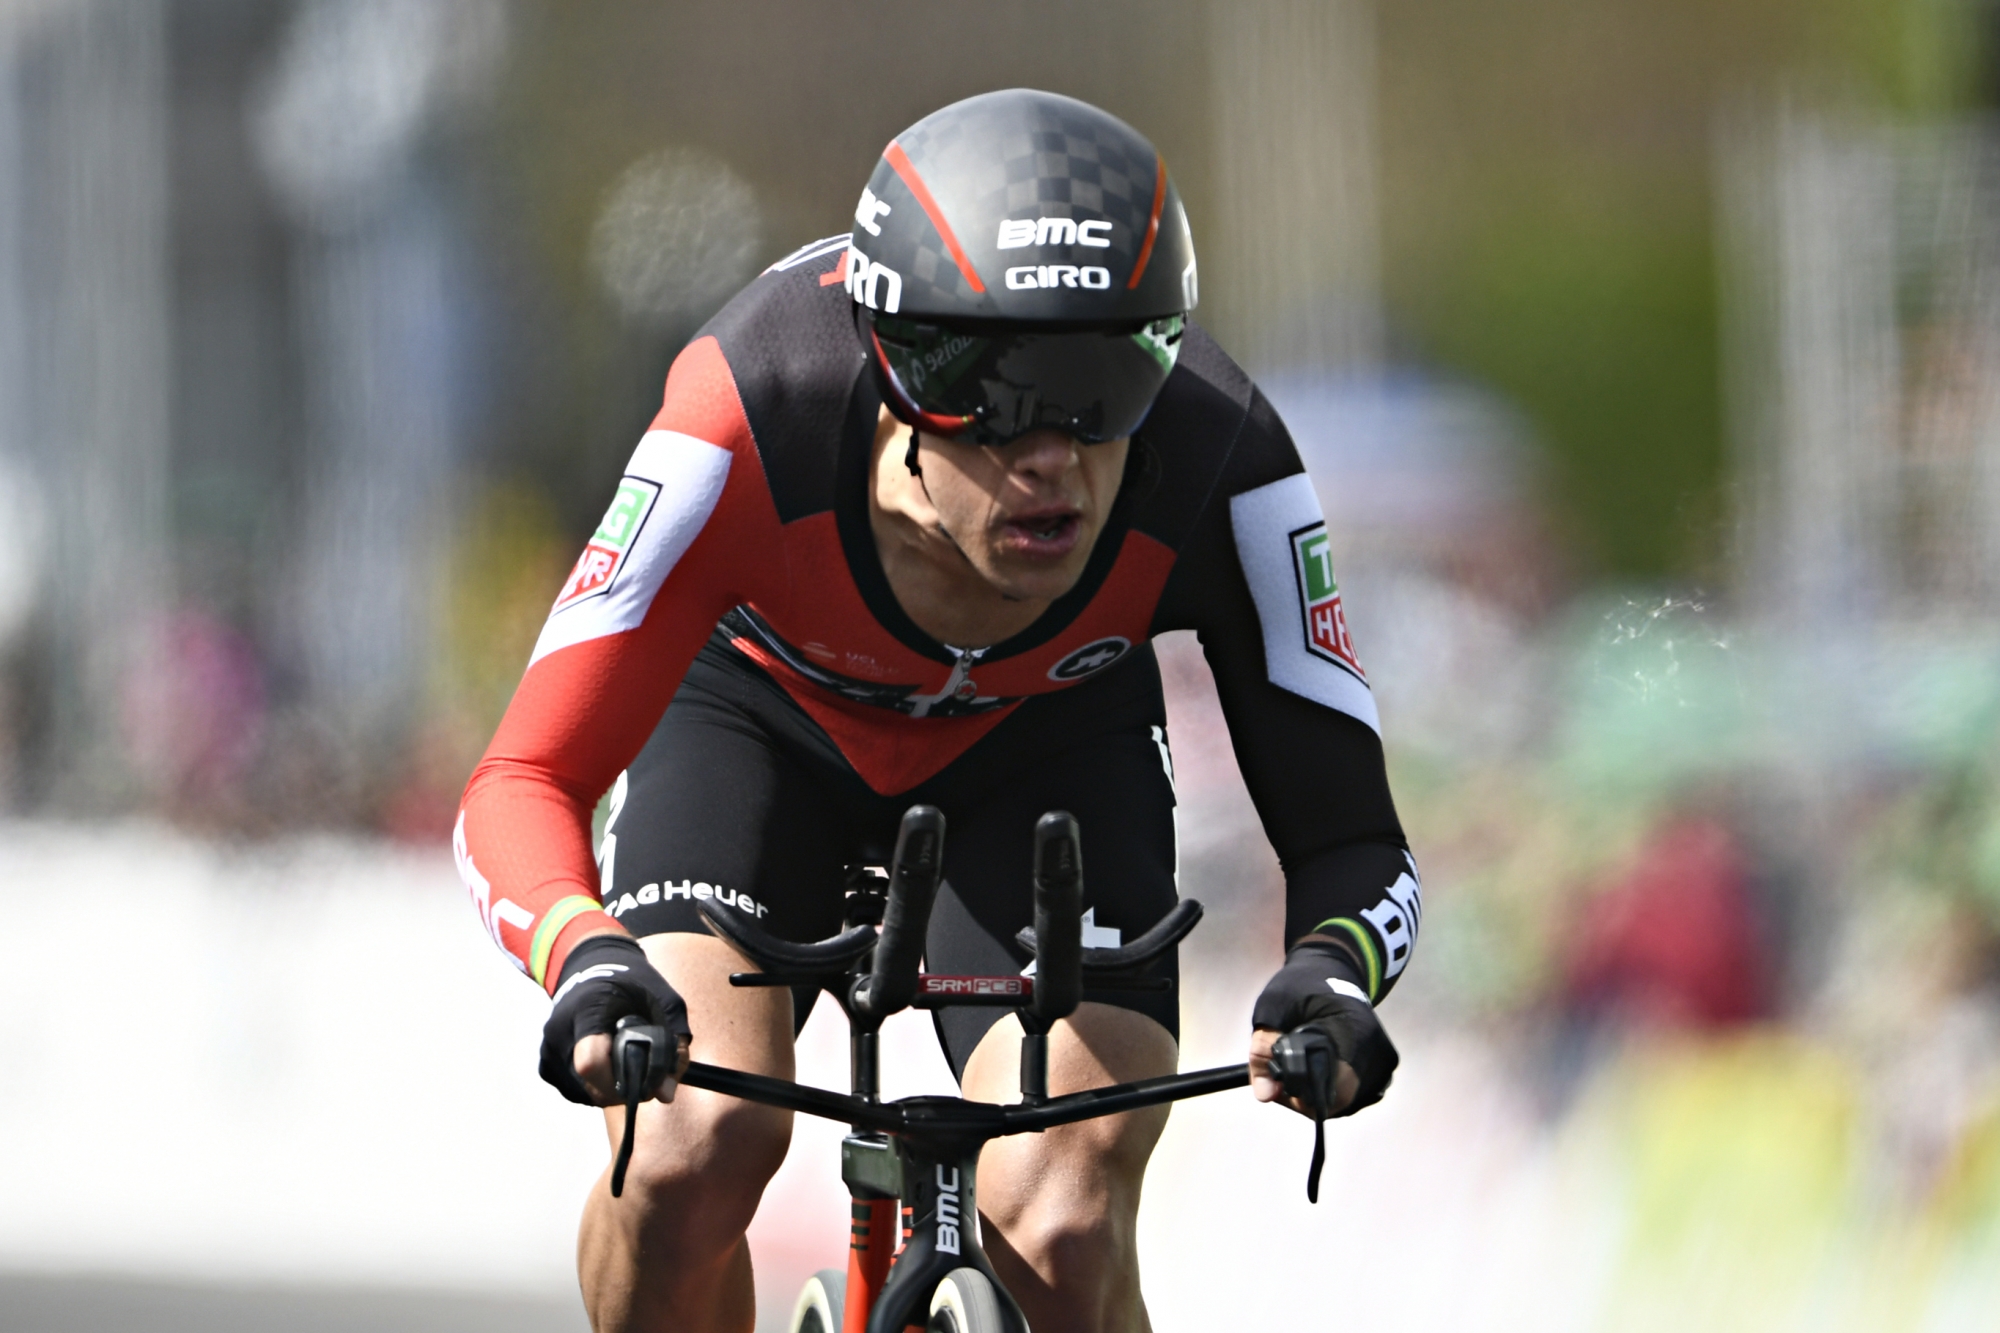 The winner of the 71th Tour de Romandie Richie Porte from Australia of team BMC Racing in action during the fifth and last stage, a 17,88 km race against the clock at the 71th Tour de Romandie UCI ProTour cycling race in Lausanne, Switzerland, on Sunday, April 29, 2017. (KEYSTONE/Alain Grosclaude)